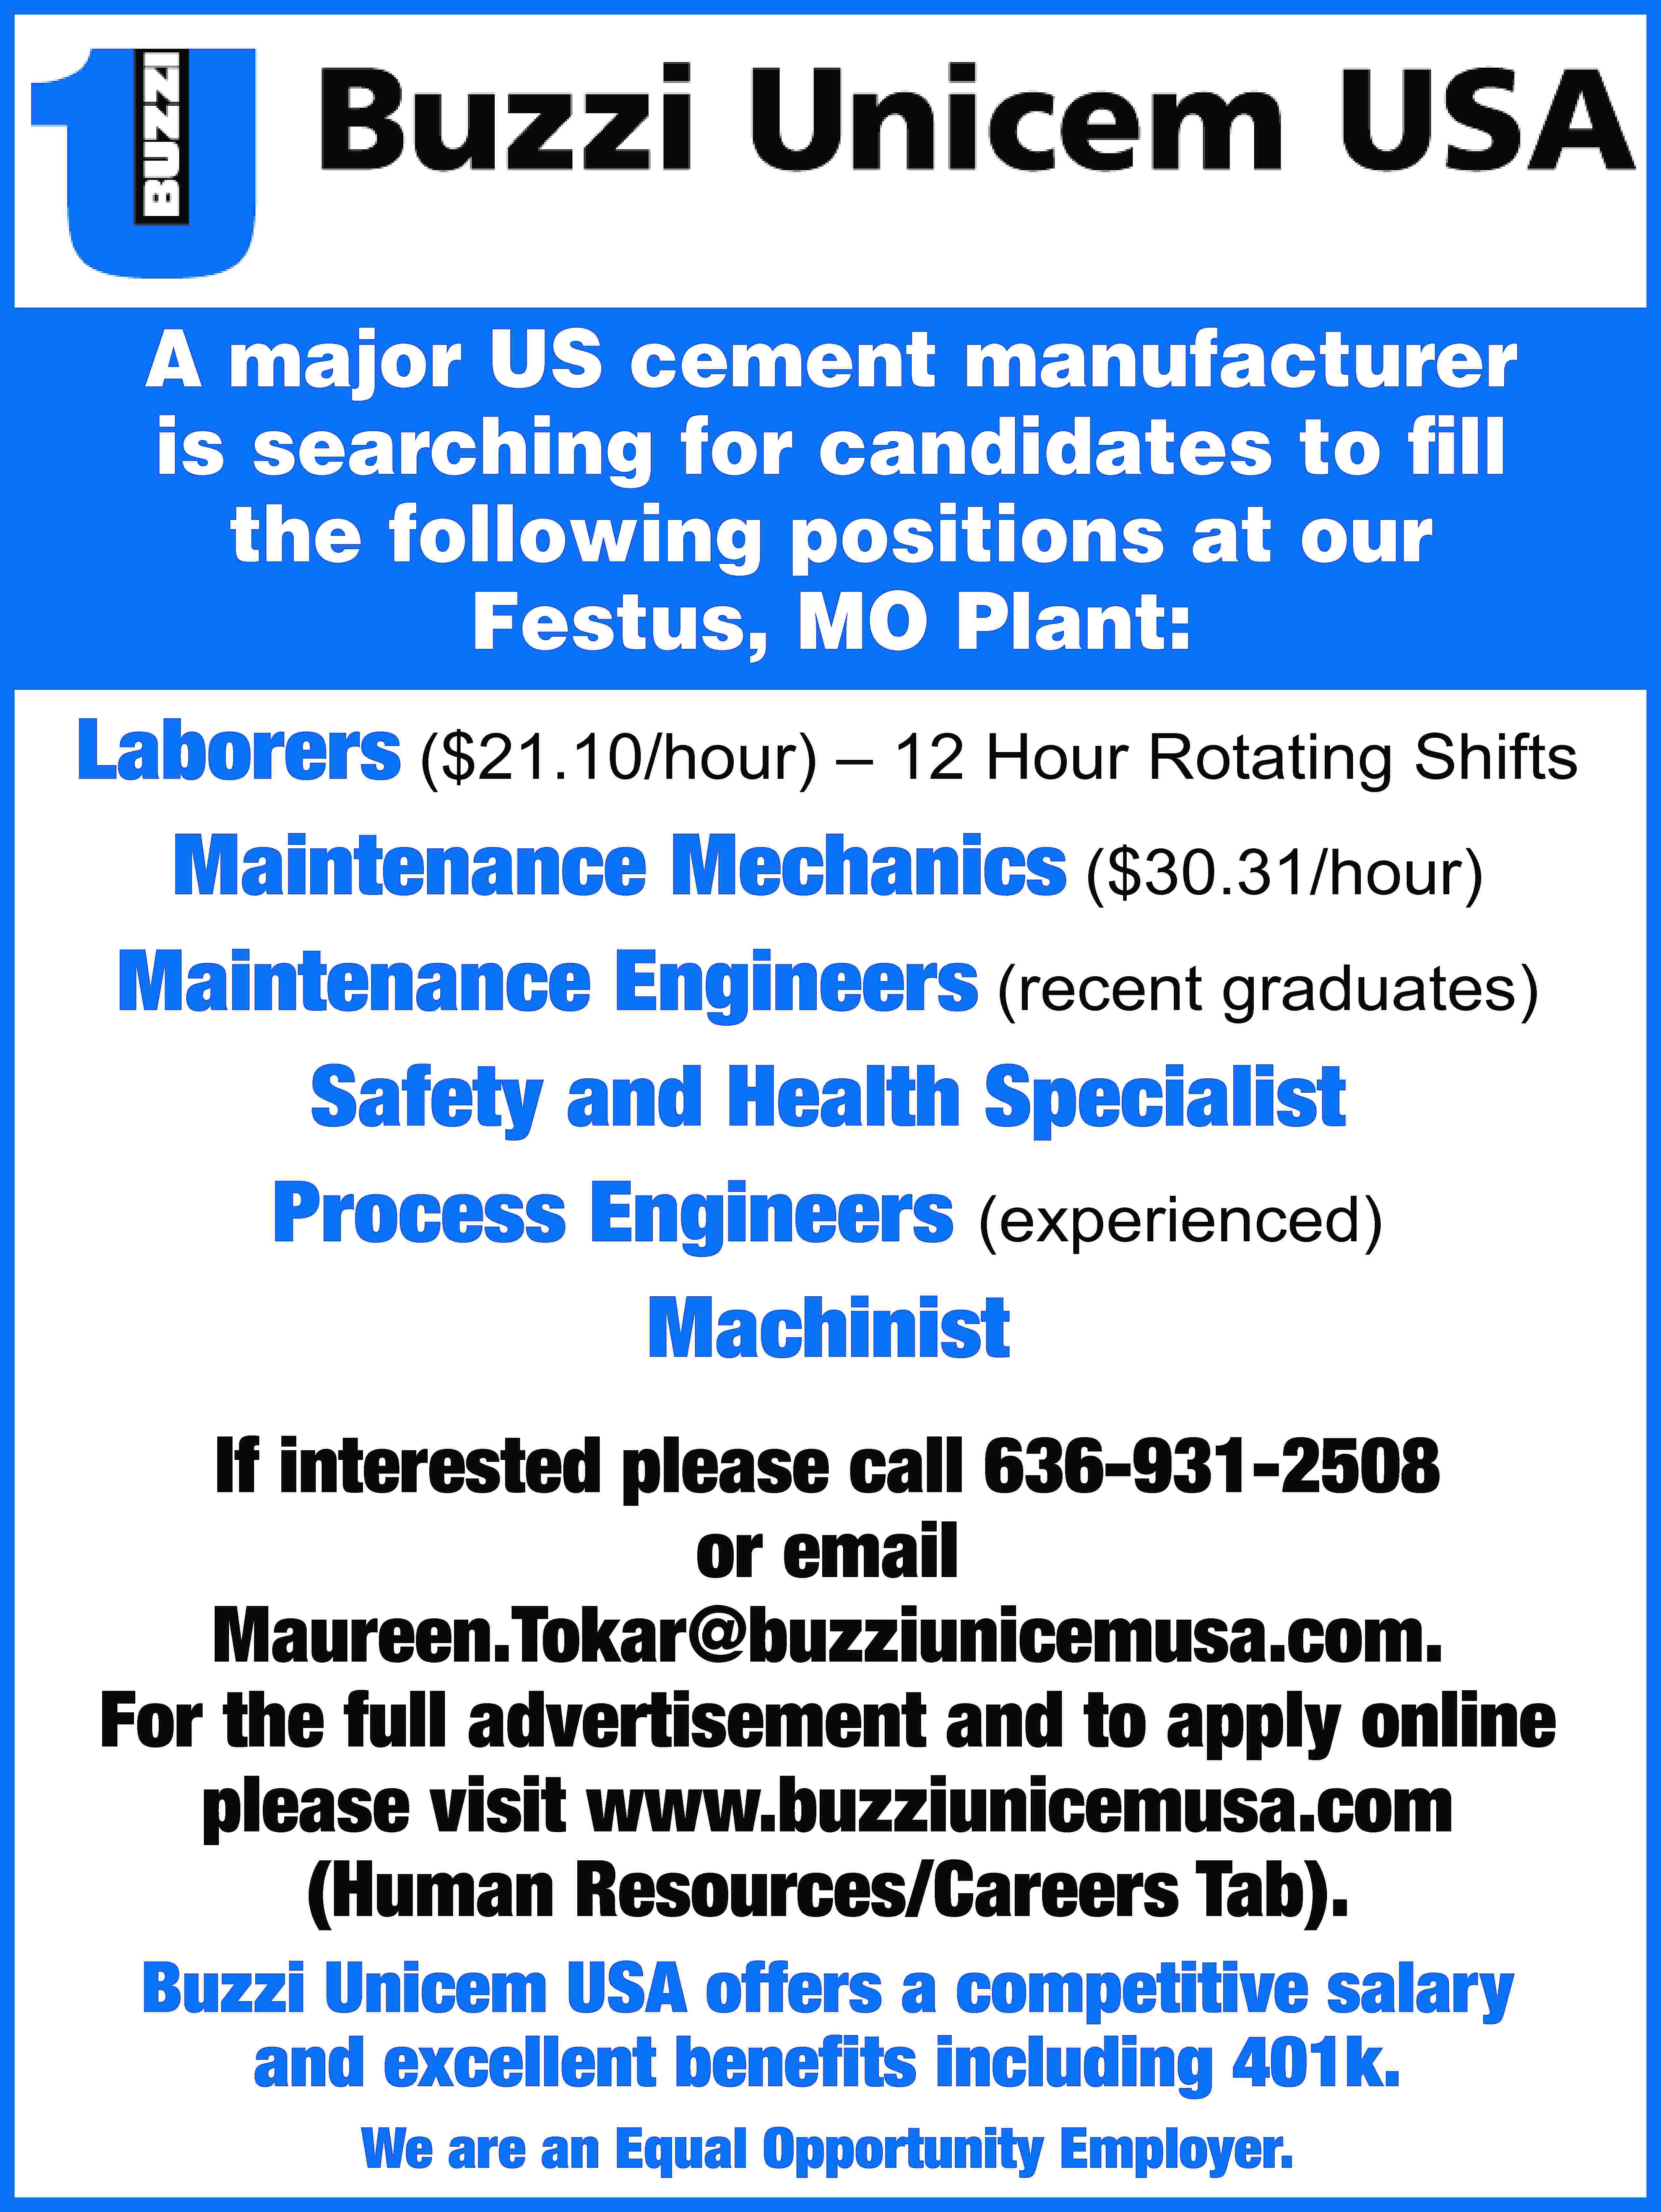 A major US cement manufacturer  A major US cement manufacturer is searching for candidates to fill the following positions at our Festus, MO Plant: Laborers ($21.10/hour) – 12 Hour Rotating Shifts Maintenance Mechanics ($30.31/hour) Maintenance Engineers (recent graduates) Safety and Health Specialist Process Engineers (experienced) Machinist If interested please call 636-931-2508 or email Maureen.Tokar@buzziunicemusa.com. For the full advertisement and to apply online please visit www.buzziunicemusa.com (Human Resources/Careers Tab). Buzzi Unicem USA offers a competitive salary and excellent benefits including 401k. We are an Equal Opportunity Employer.